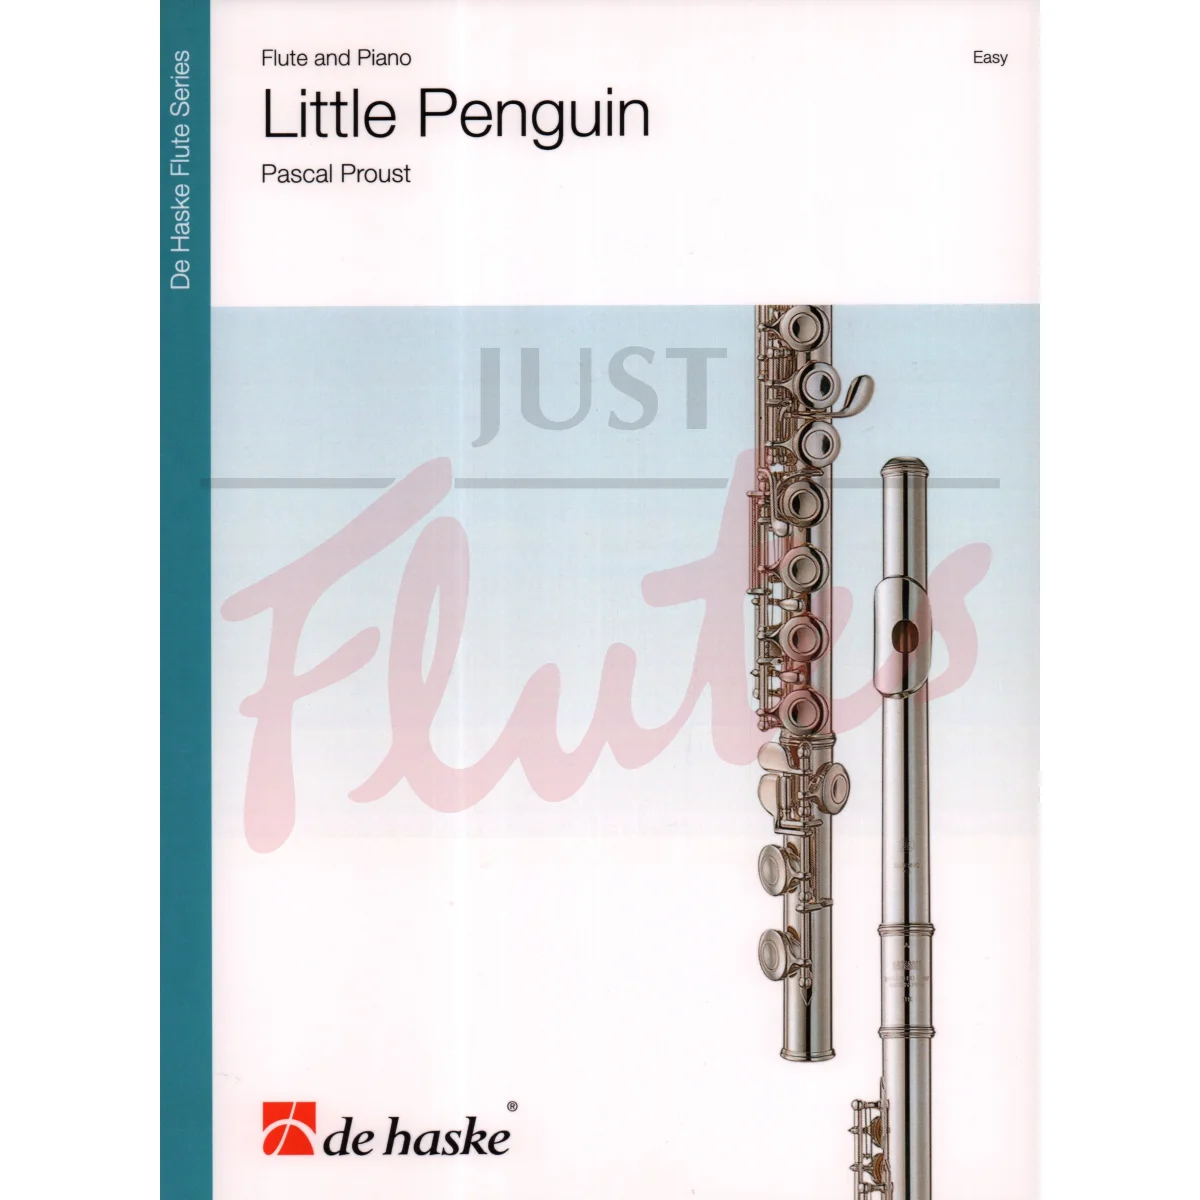 Little Penguin for Flute and Piano